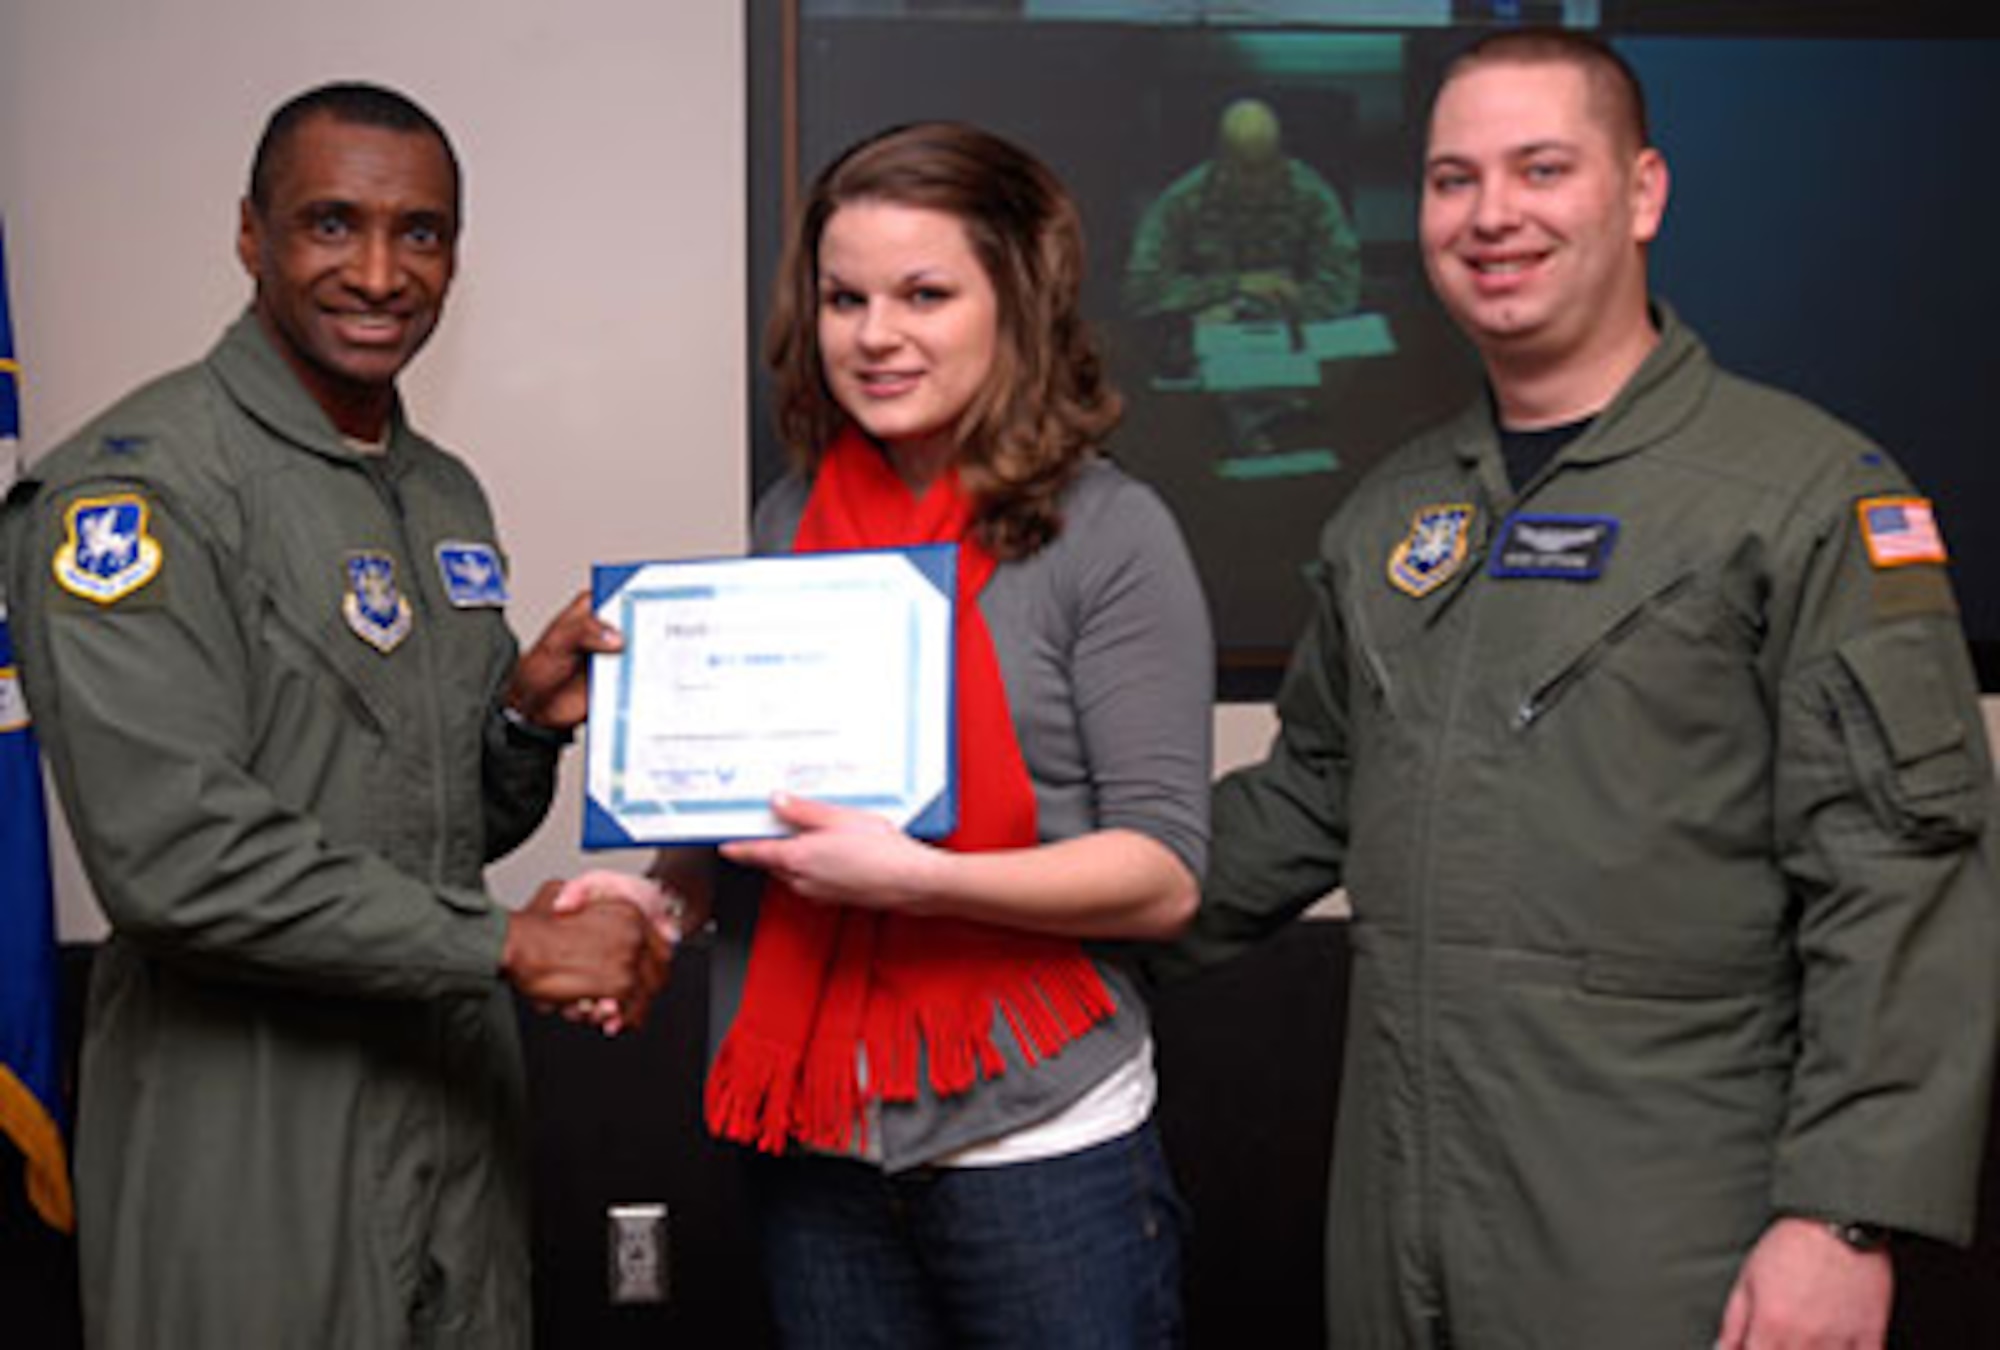 SCHRIEVER AIR FORCE BASE, Colo. - Col. Kenneth Allison presents Erin Wetmore with a certificate following a surprise announcement in which Mrs. Wetmore was announced as the winner of the Year of the Air Force Family "My Air Force Life" short story contest Feb. 24. Mrs. Wetmore was joined by her husband, 1st. Lt. Ross Wetmore, 50th Operations Support Squadron. (U.S. Air Force photo/Tech. Sgt. Stacy Foster)